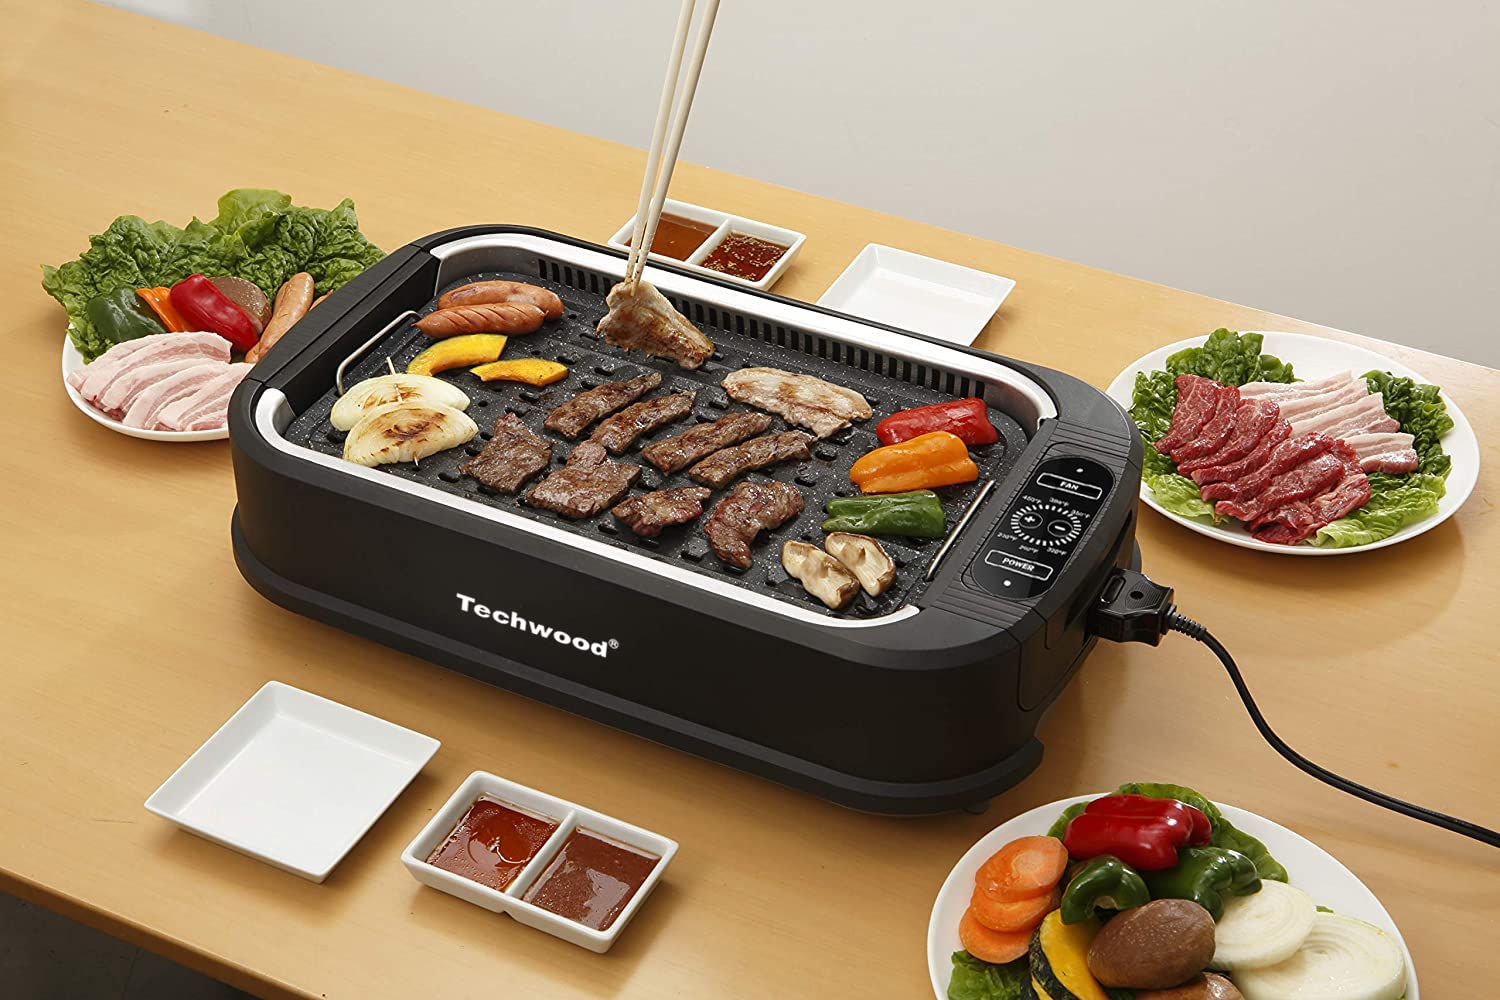 Indoor Smokeless Grill, Techwood 1500W Electric Grill with